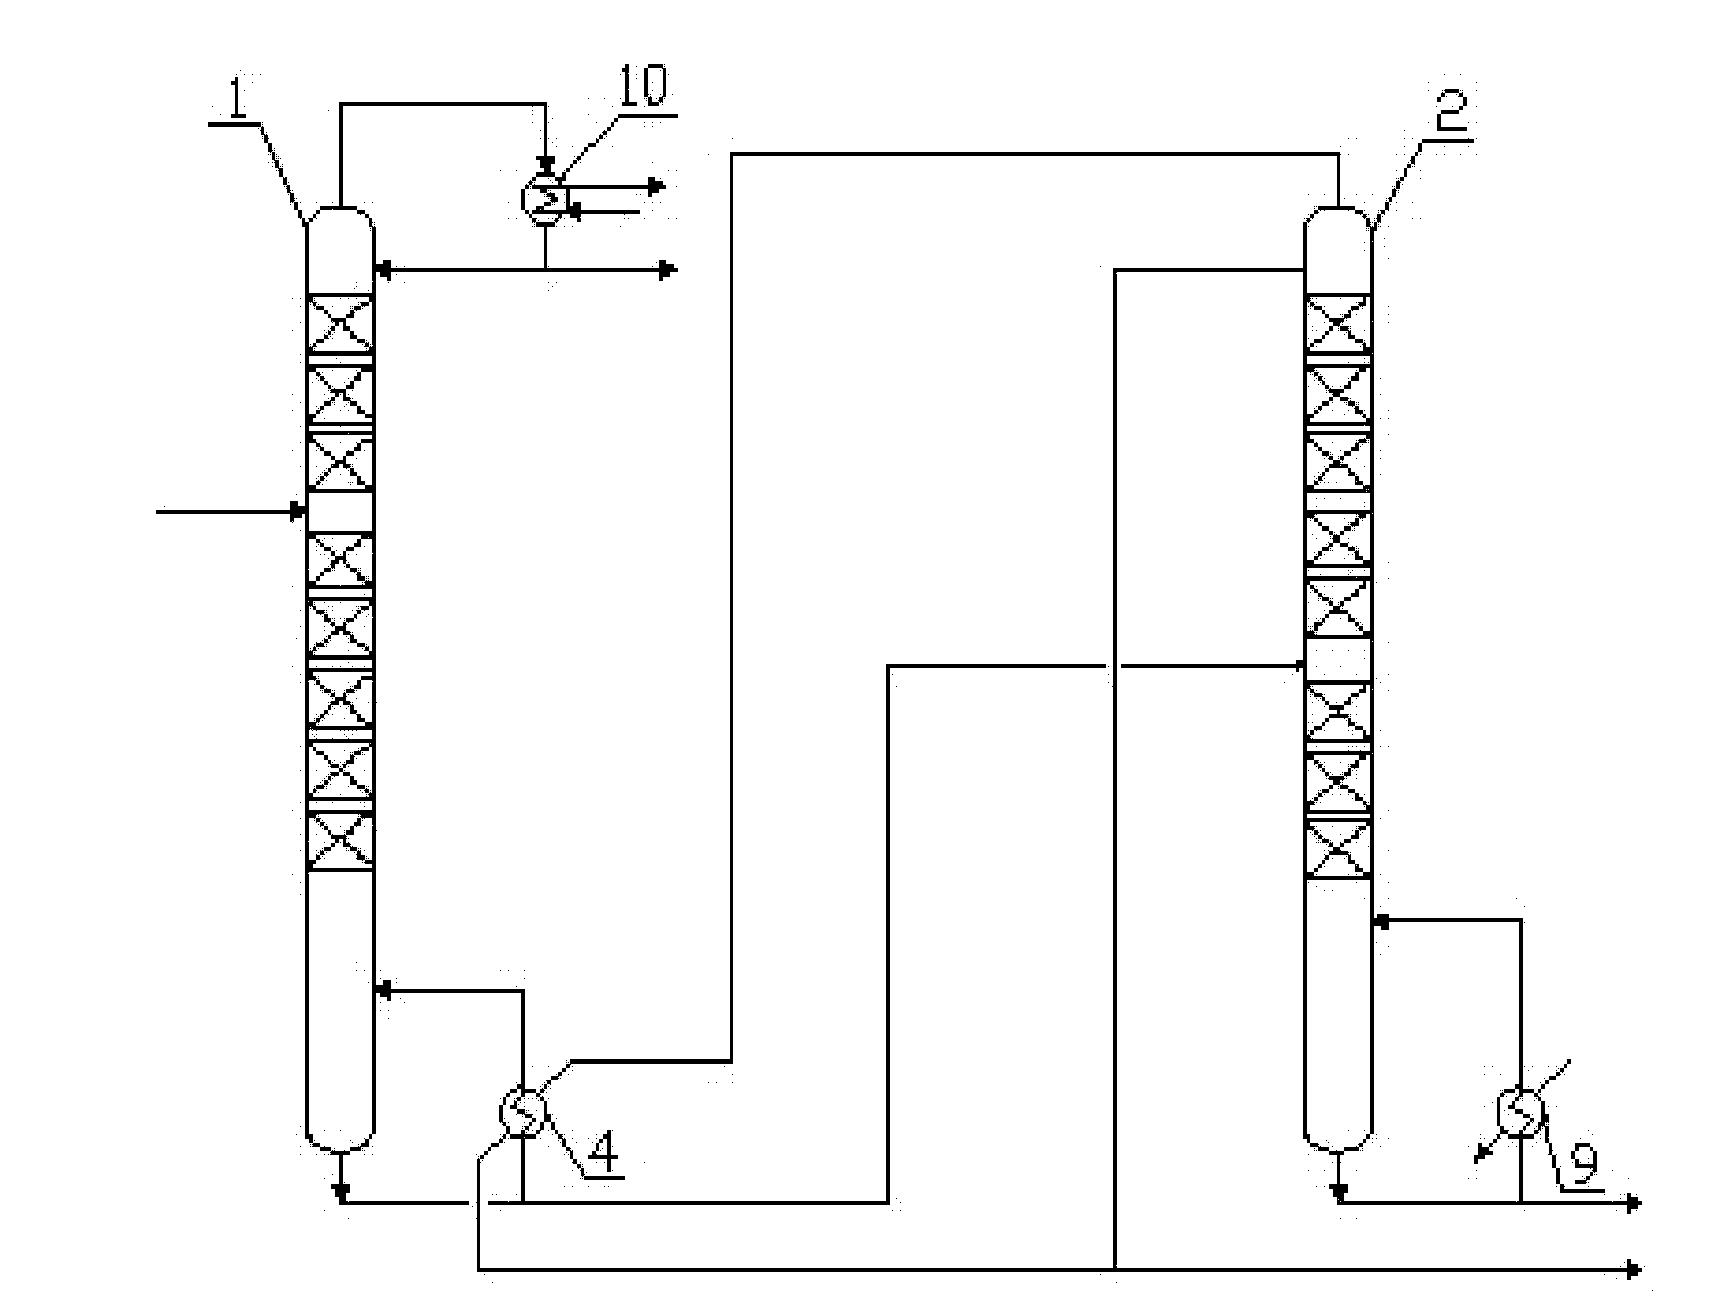 Heat pump distillation and multi-effect distillation integrated device and process for purifying trichlorosilane